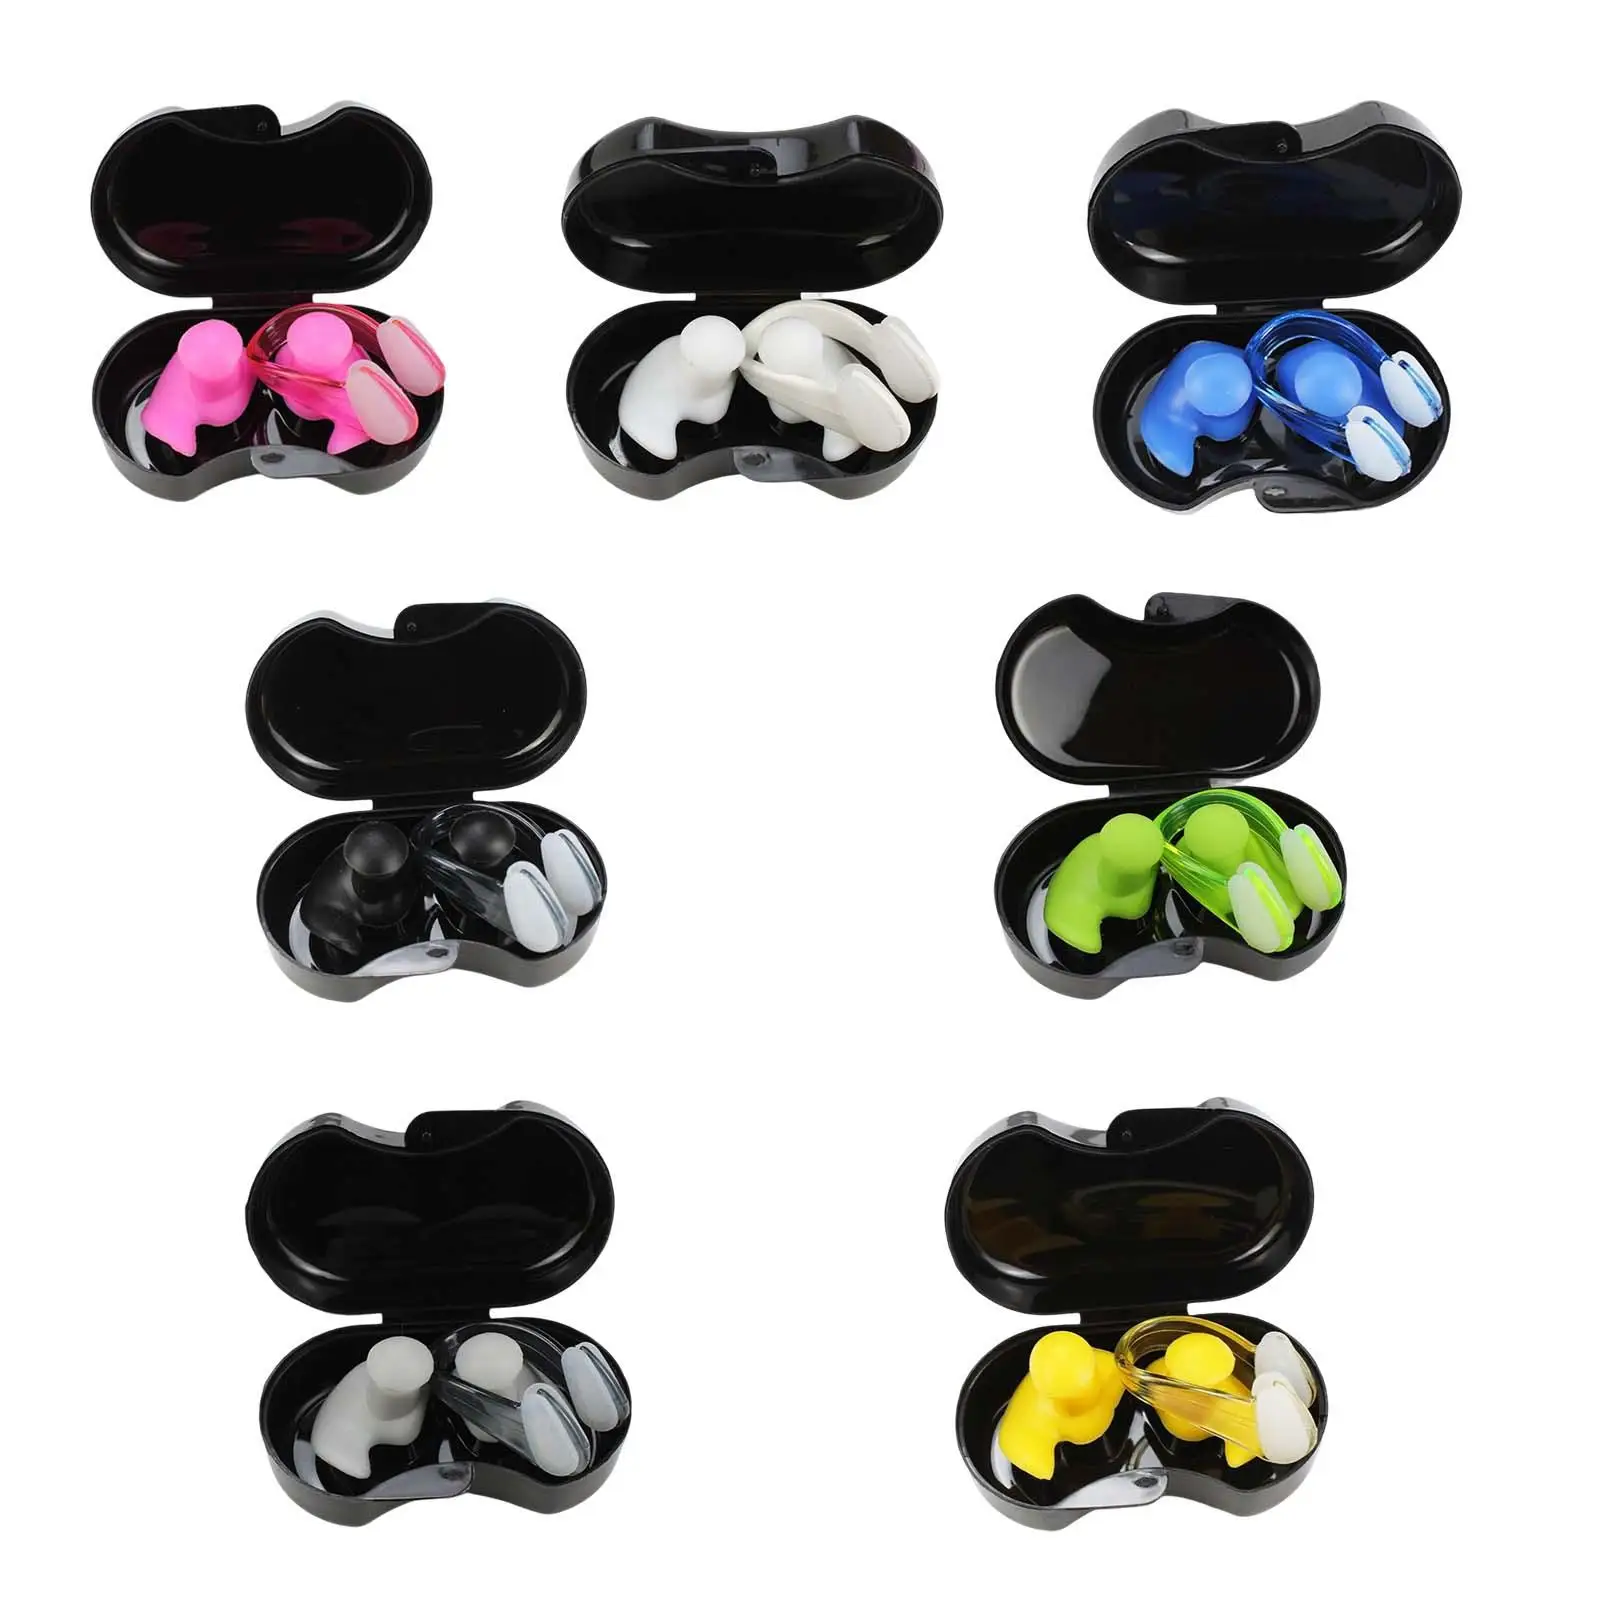 Swimming Ear Plug Nose Clip Set Silicone Earplugs Waterproof Ear Nose Protector with Storage Box for Water Sports Men Women Kids